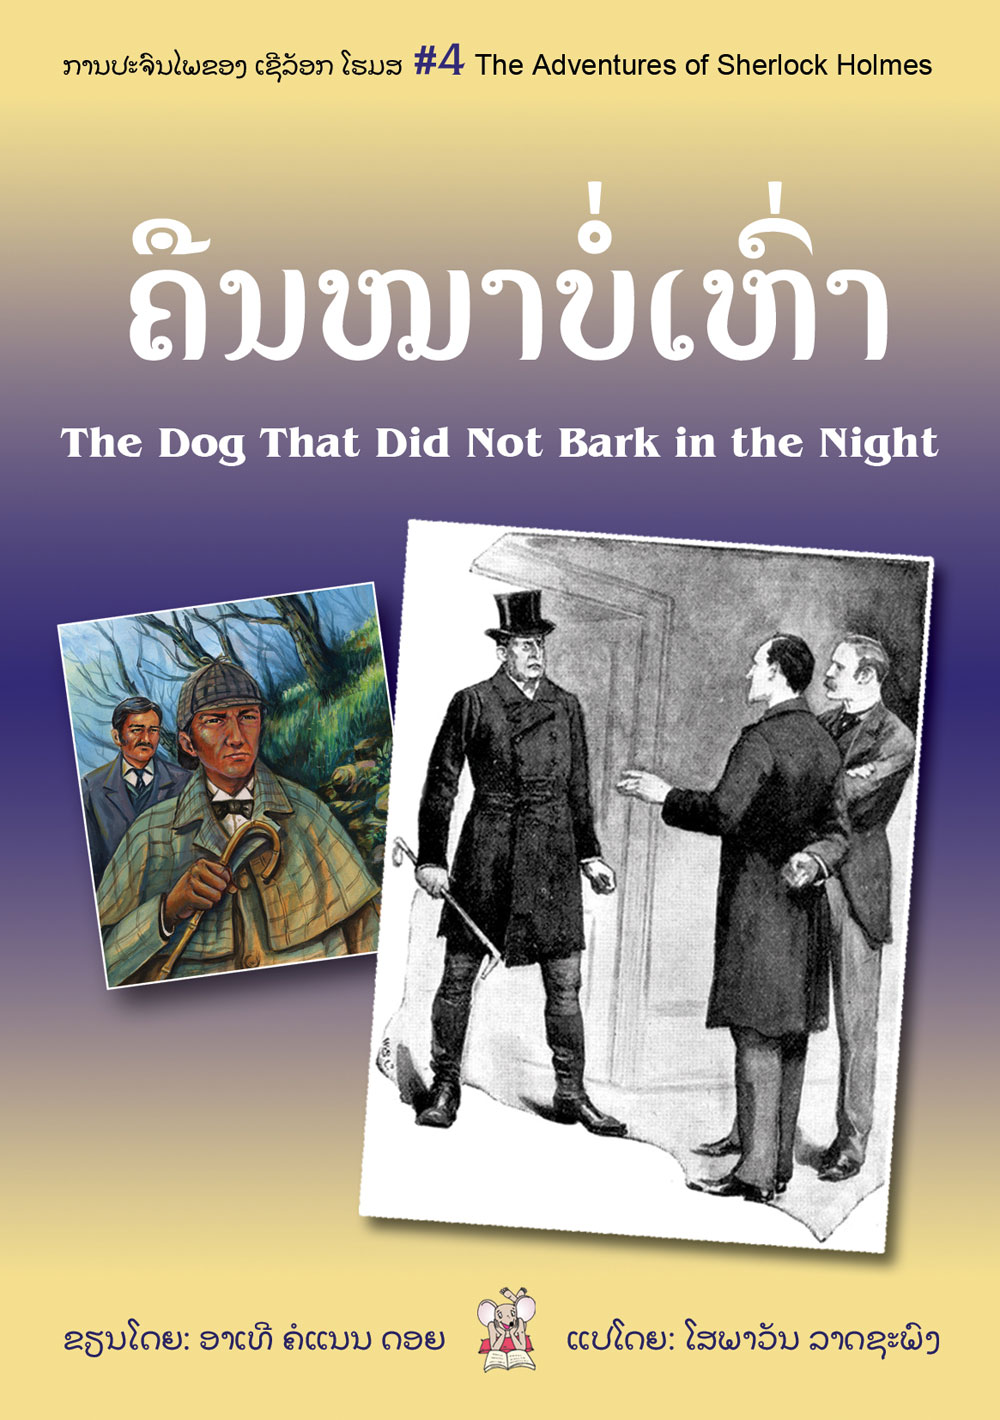 The Dog That Did Not Bark in the Night large book cover, published in Lao and English